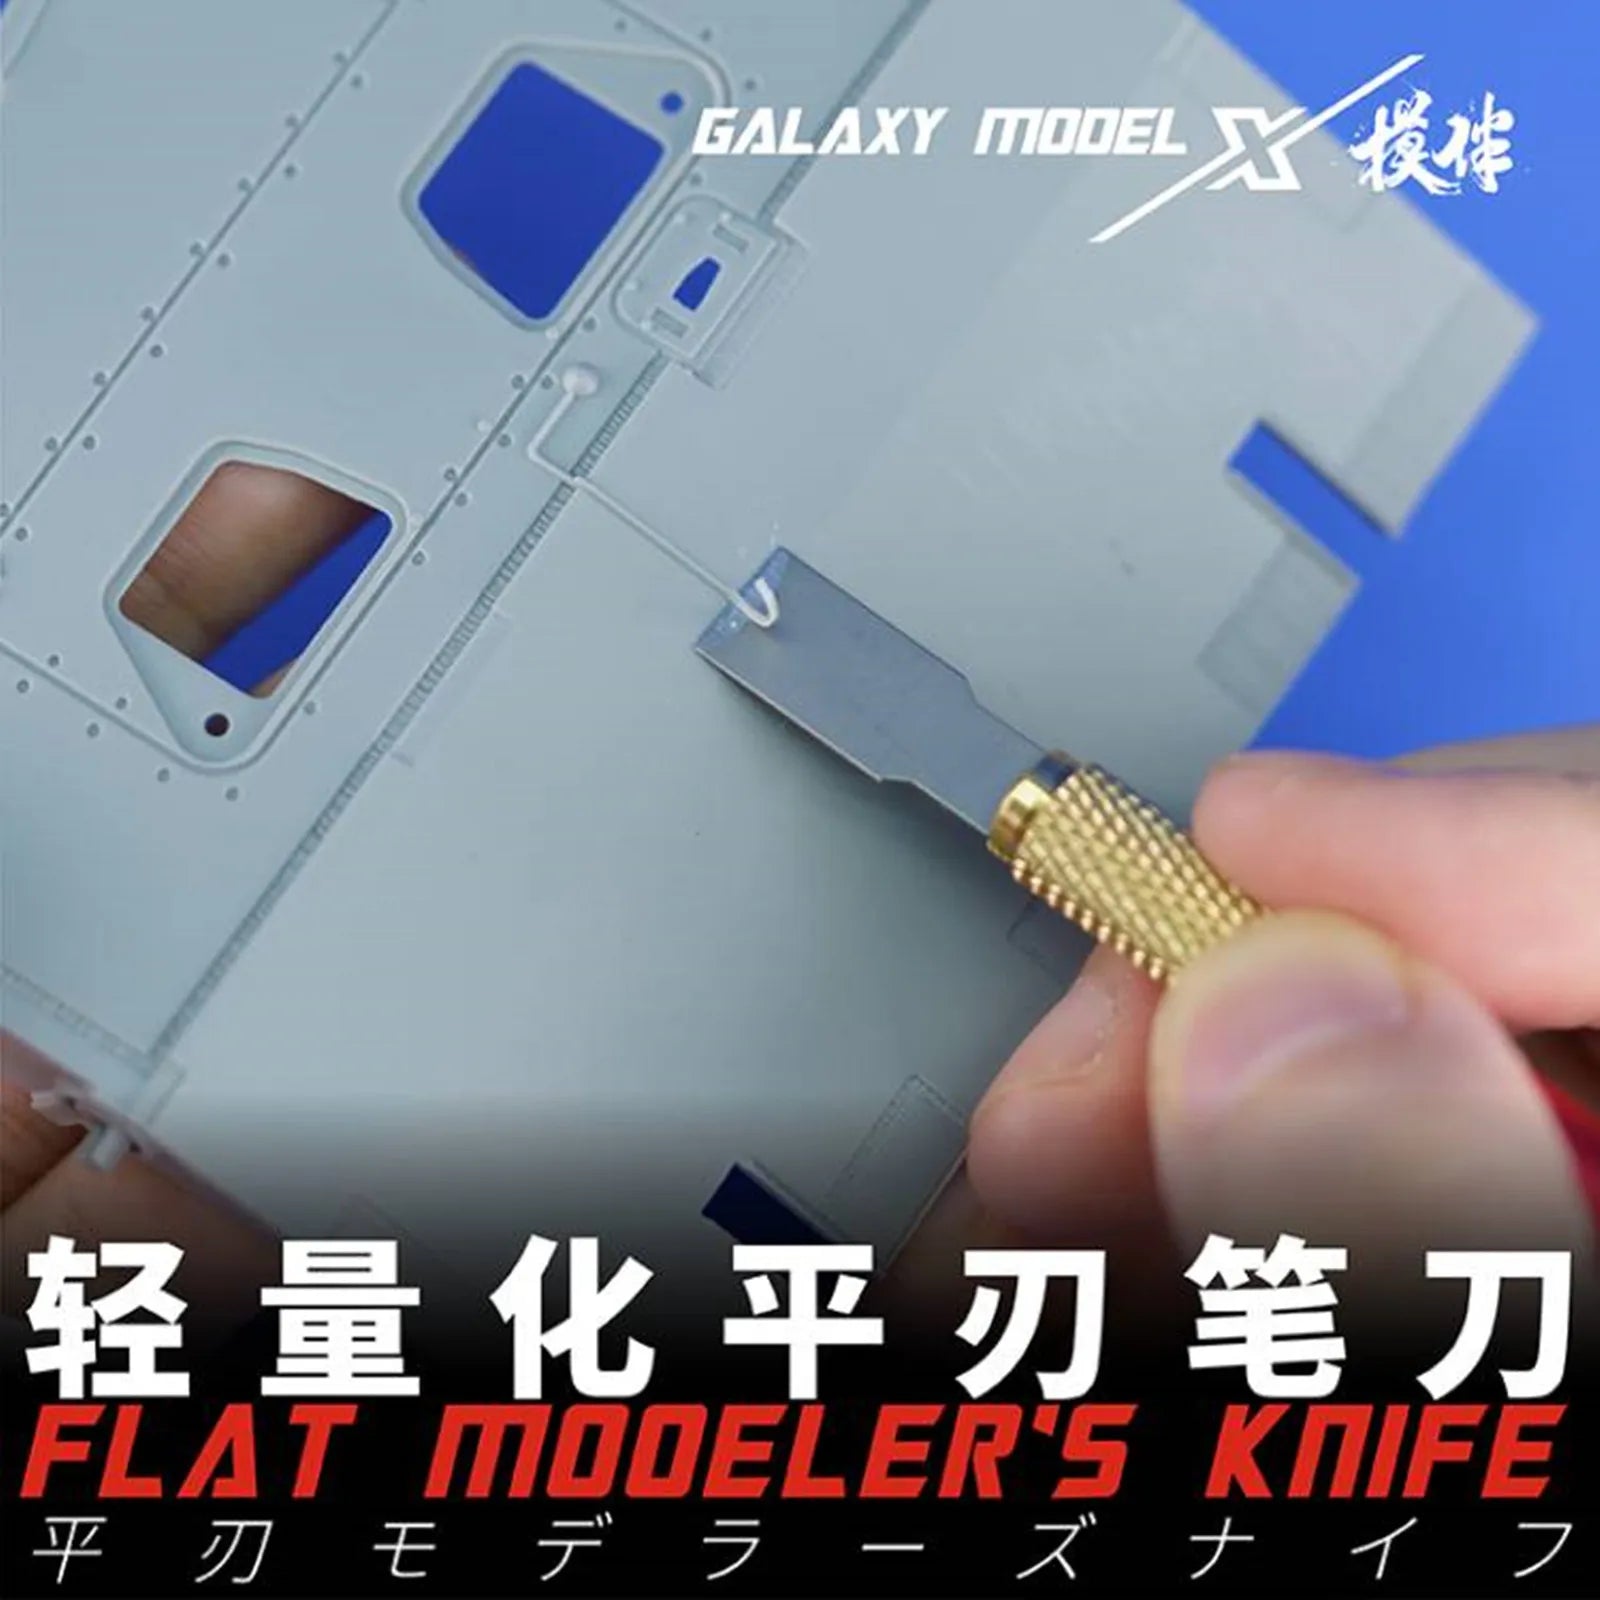 GALAXY Tool Flat Modeler's Knife for Precision Assembly in Model Building